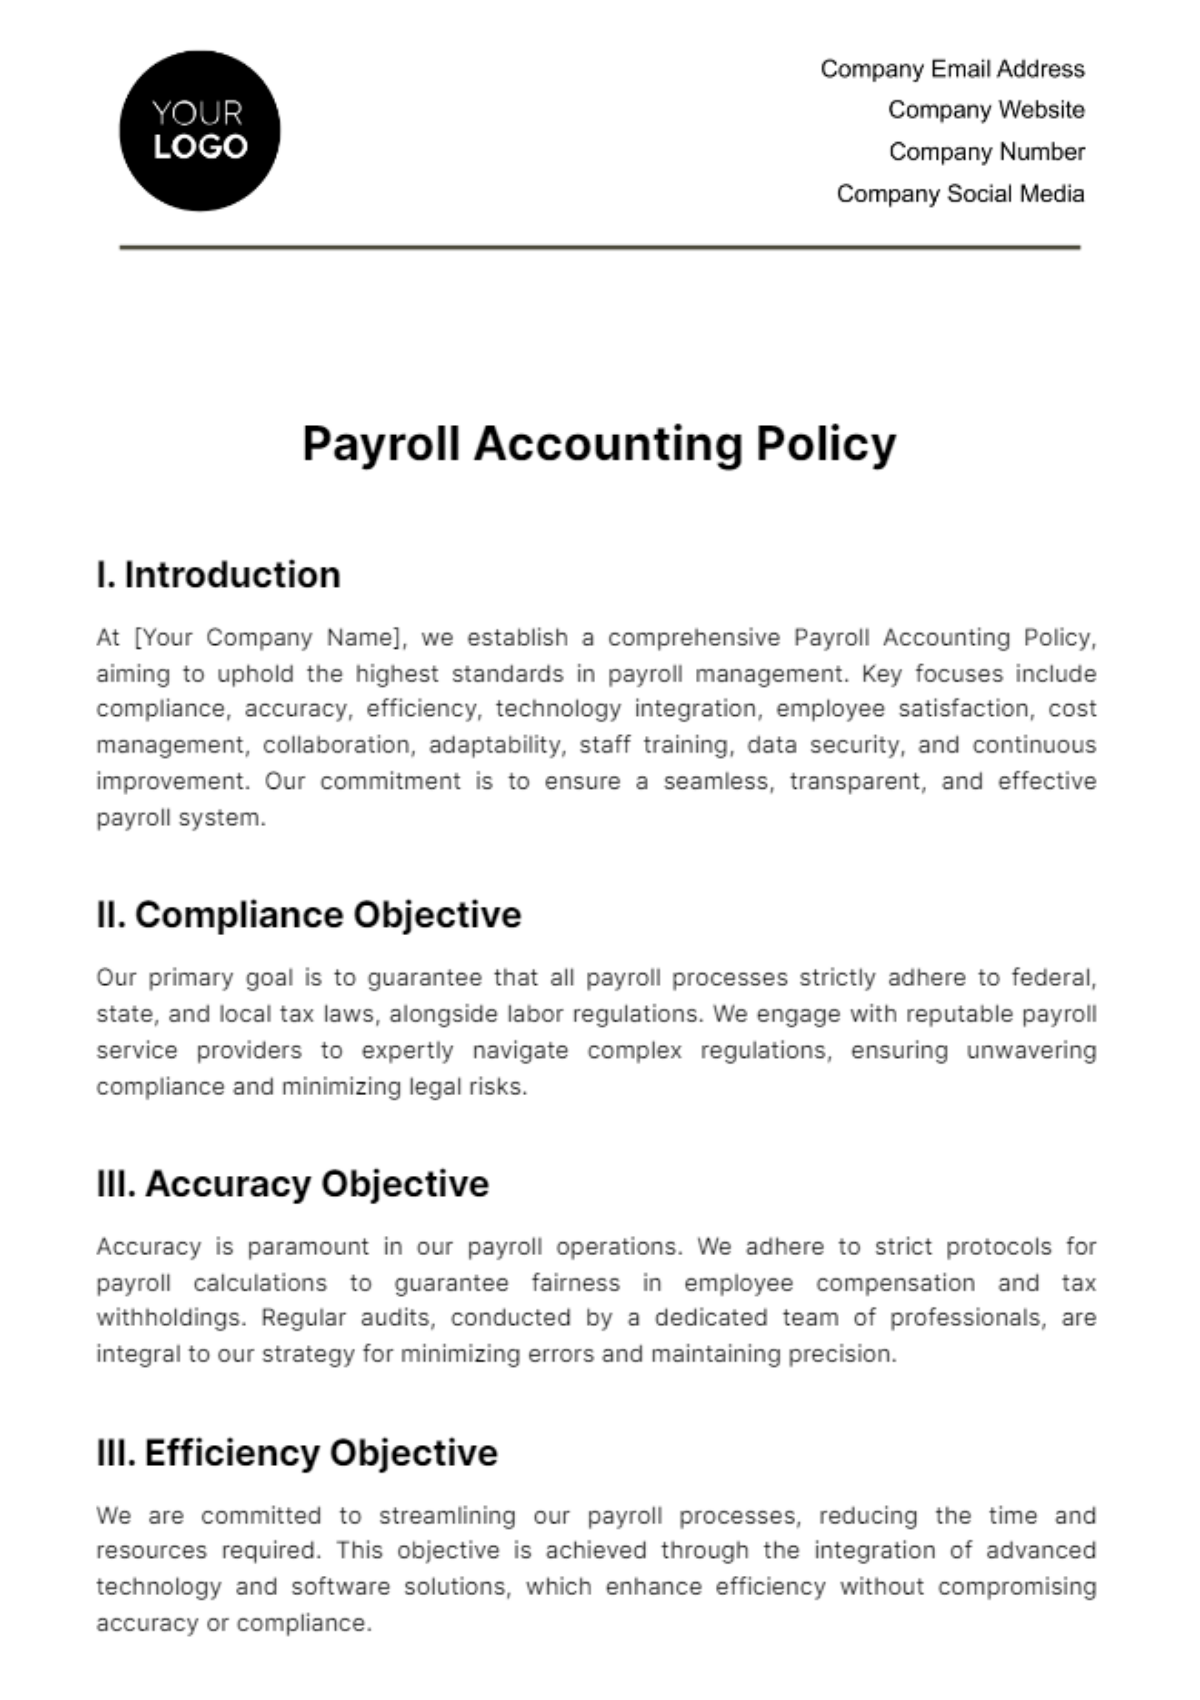 Free Payroll Accounting Policy Template